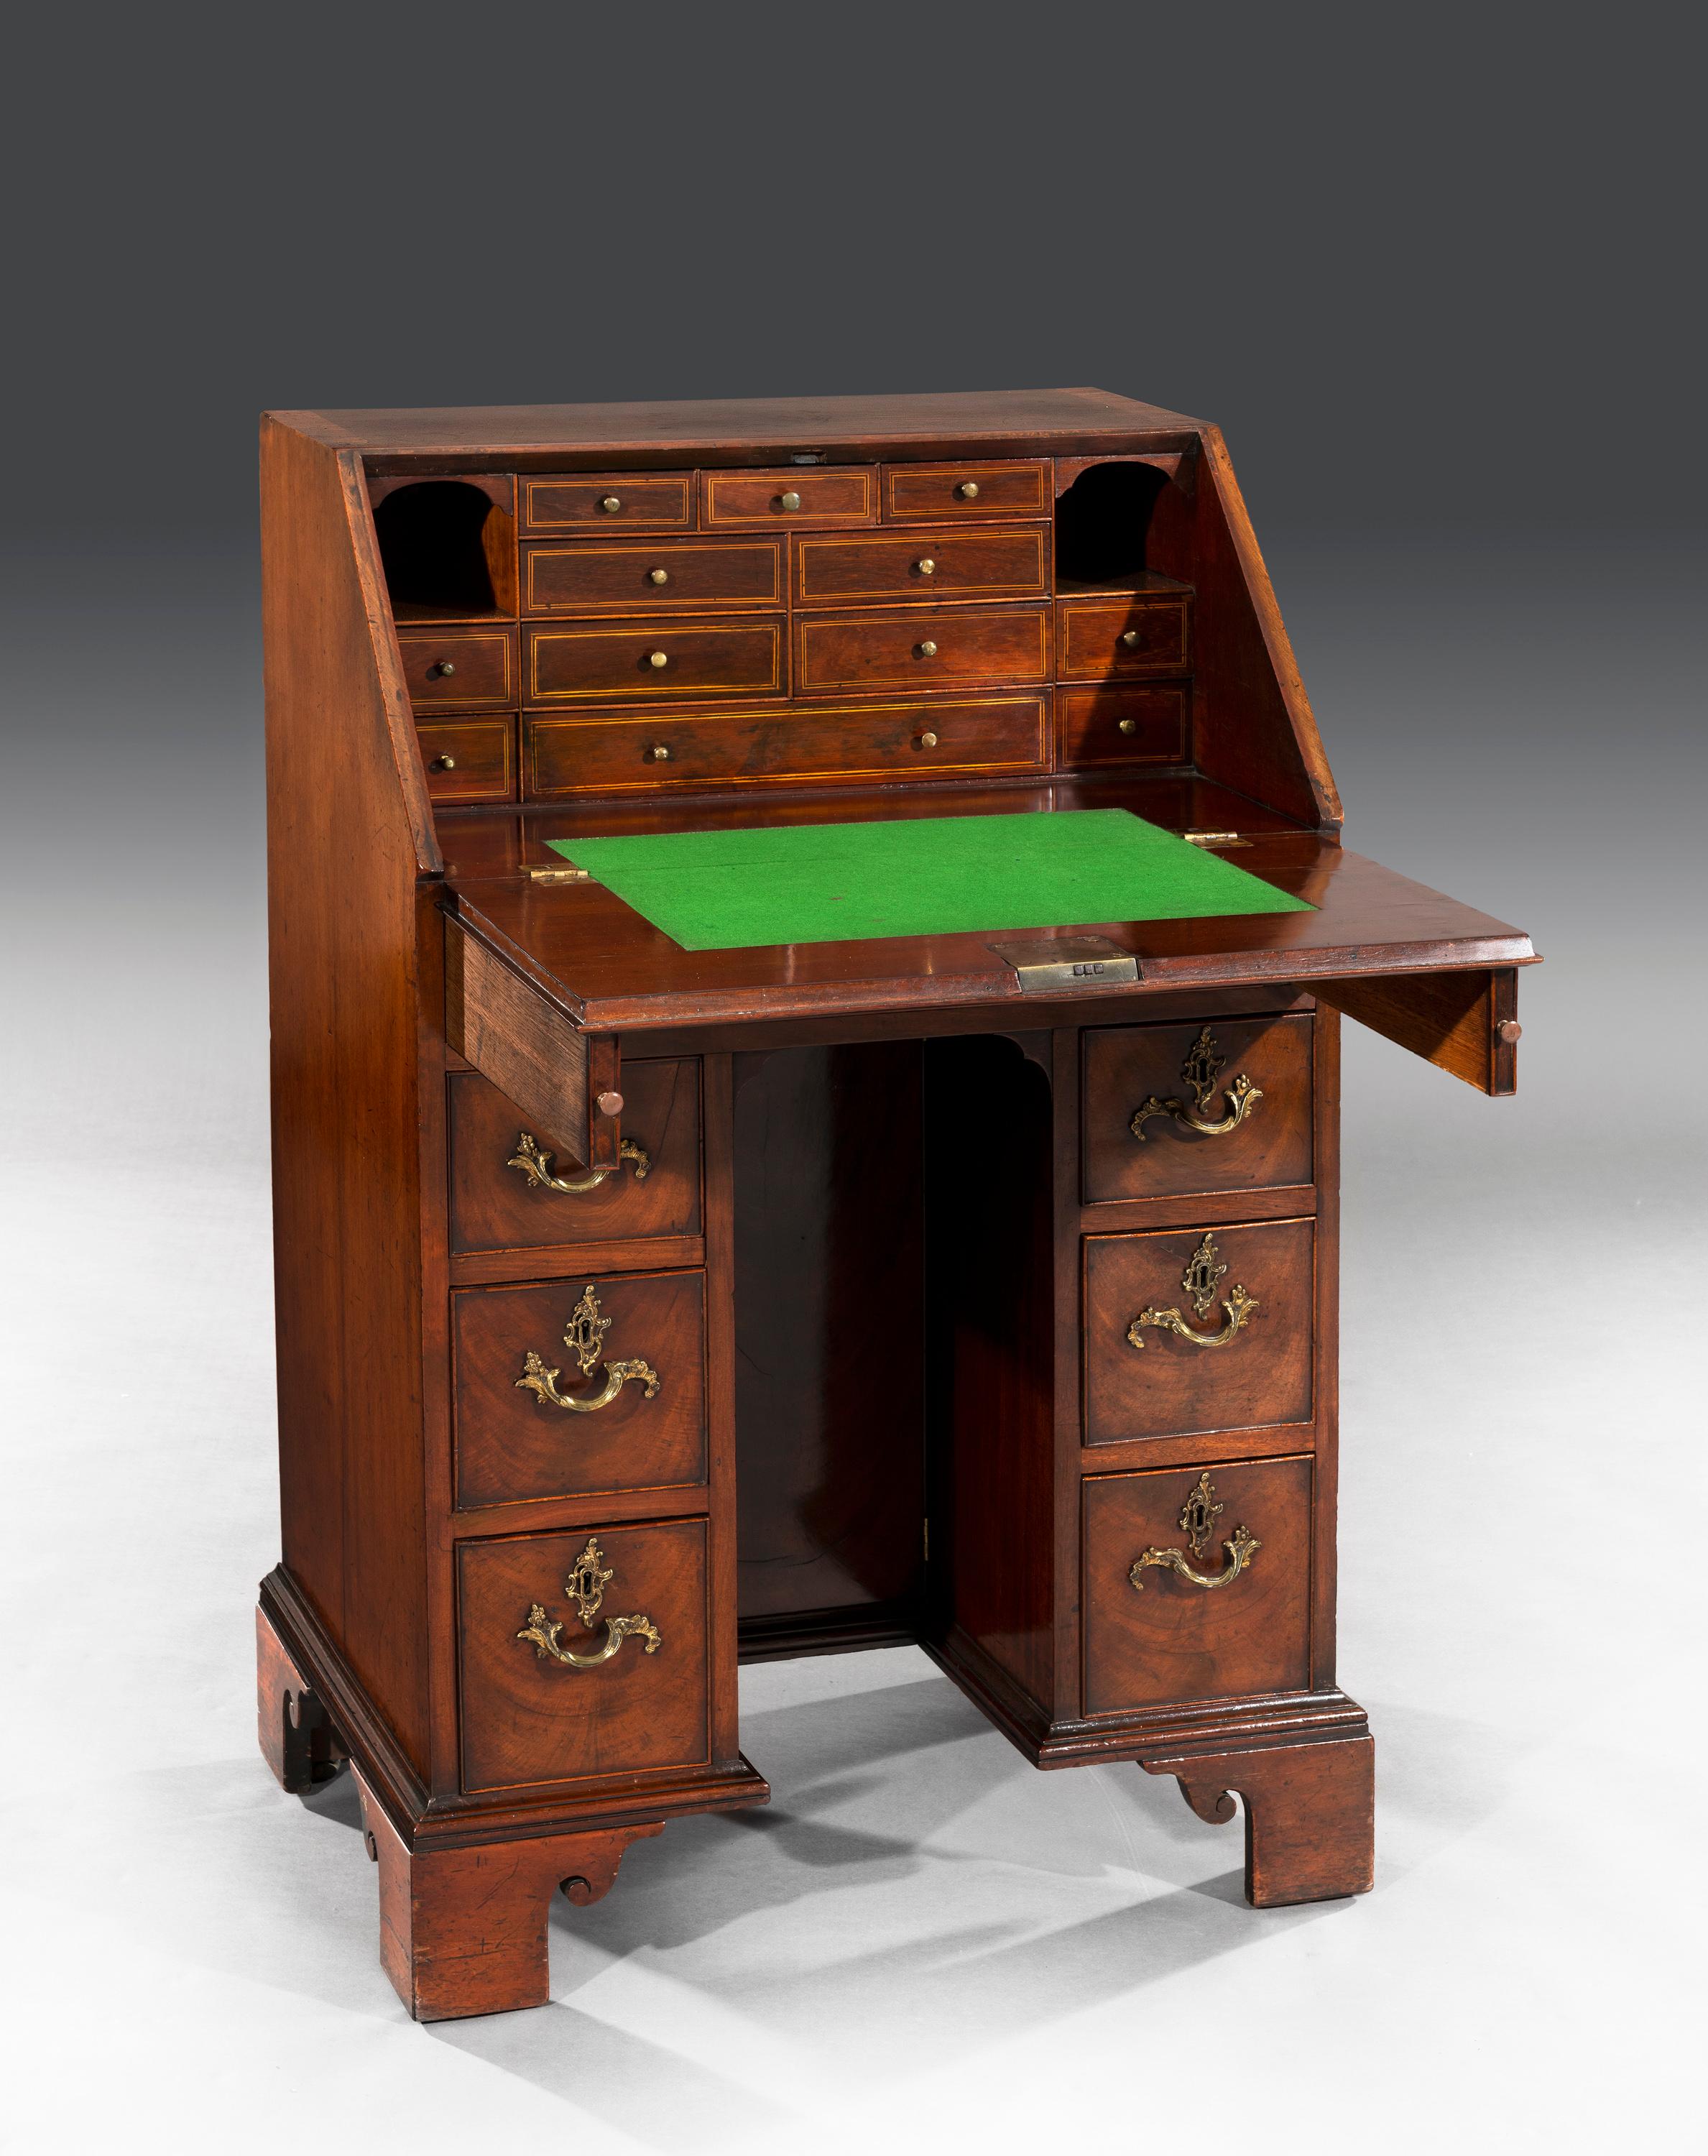 Small George III 18th Century Period Kneehole Mahogany Bureau In Good Condition For Sale In Bradford on Avon, GB